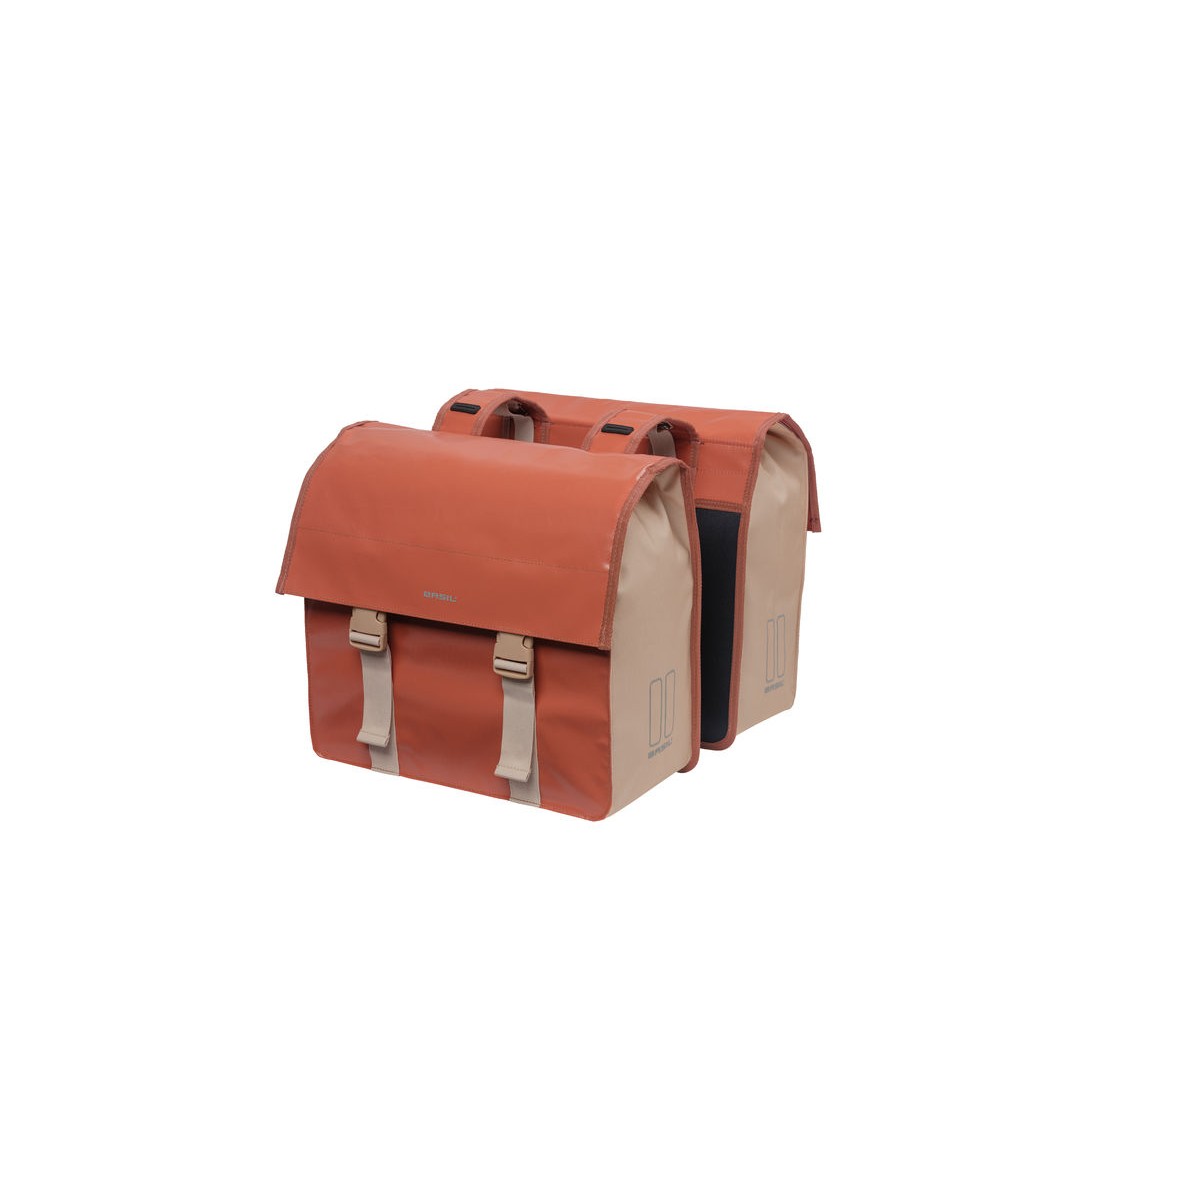 Basil Urban Load sacoche double, 48-53L, terra red/rose